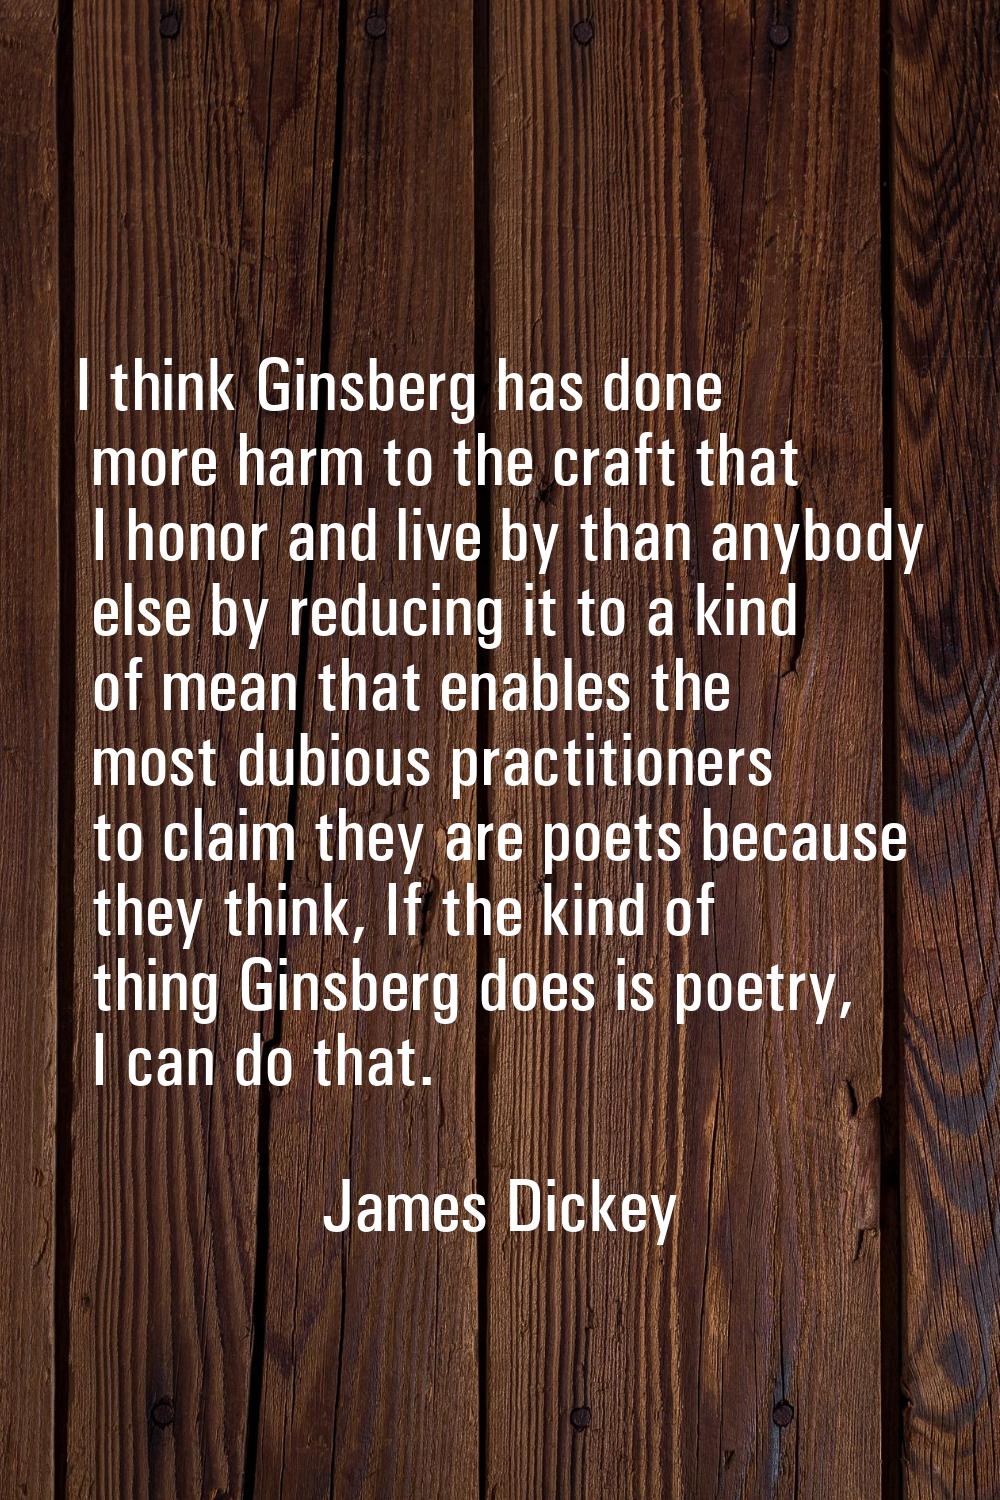 I think Ginsberg has done more harm to the craft that I honor and live by than anybody else by redu